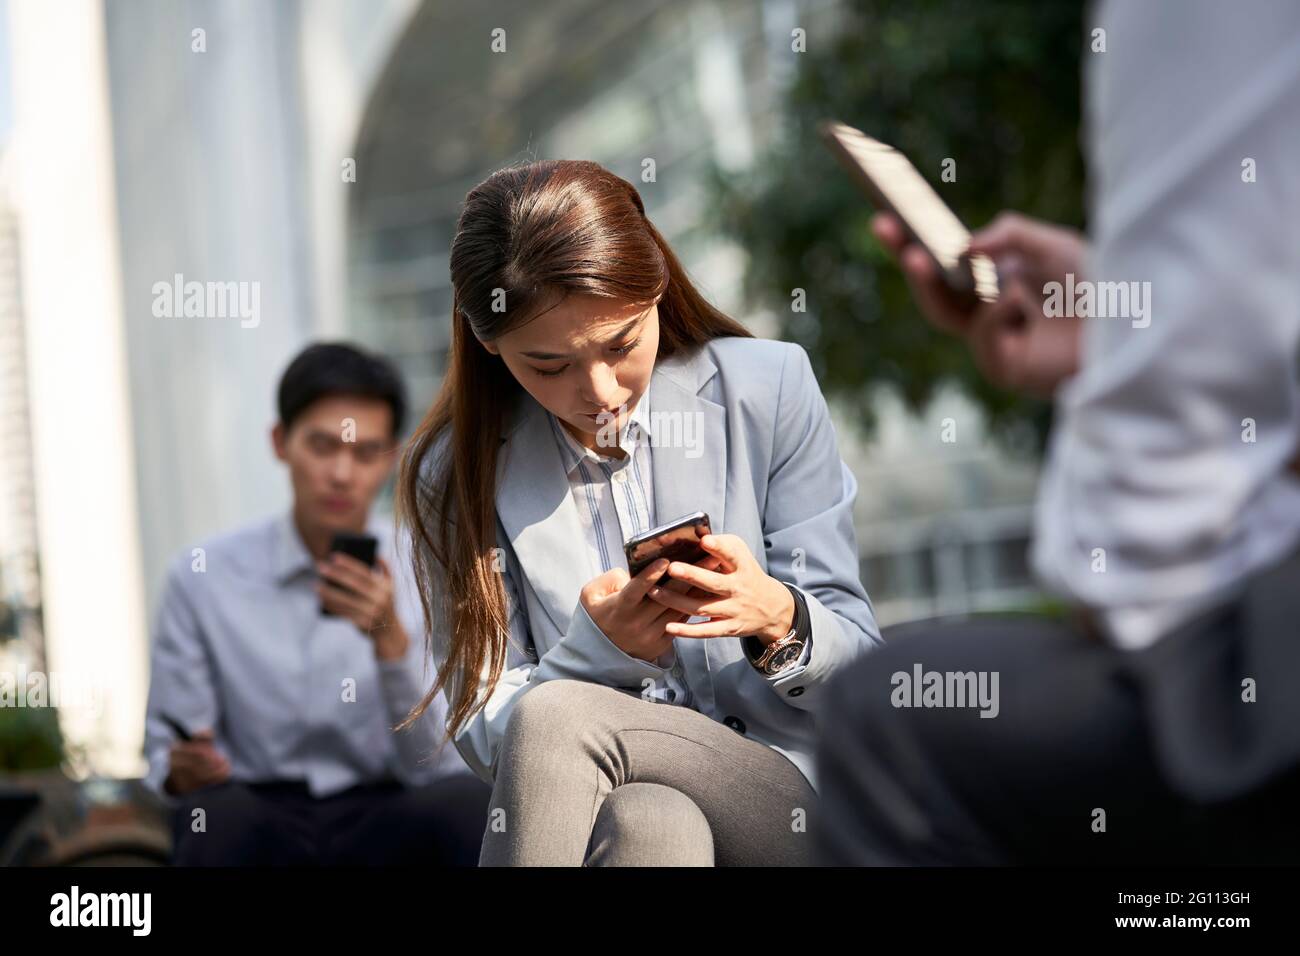 asian business people using cellphone outdoors concept for social media addiction Stock Photo